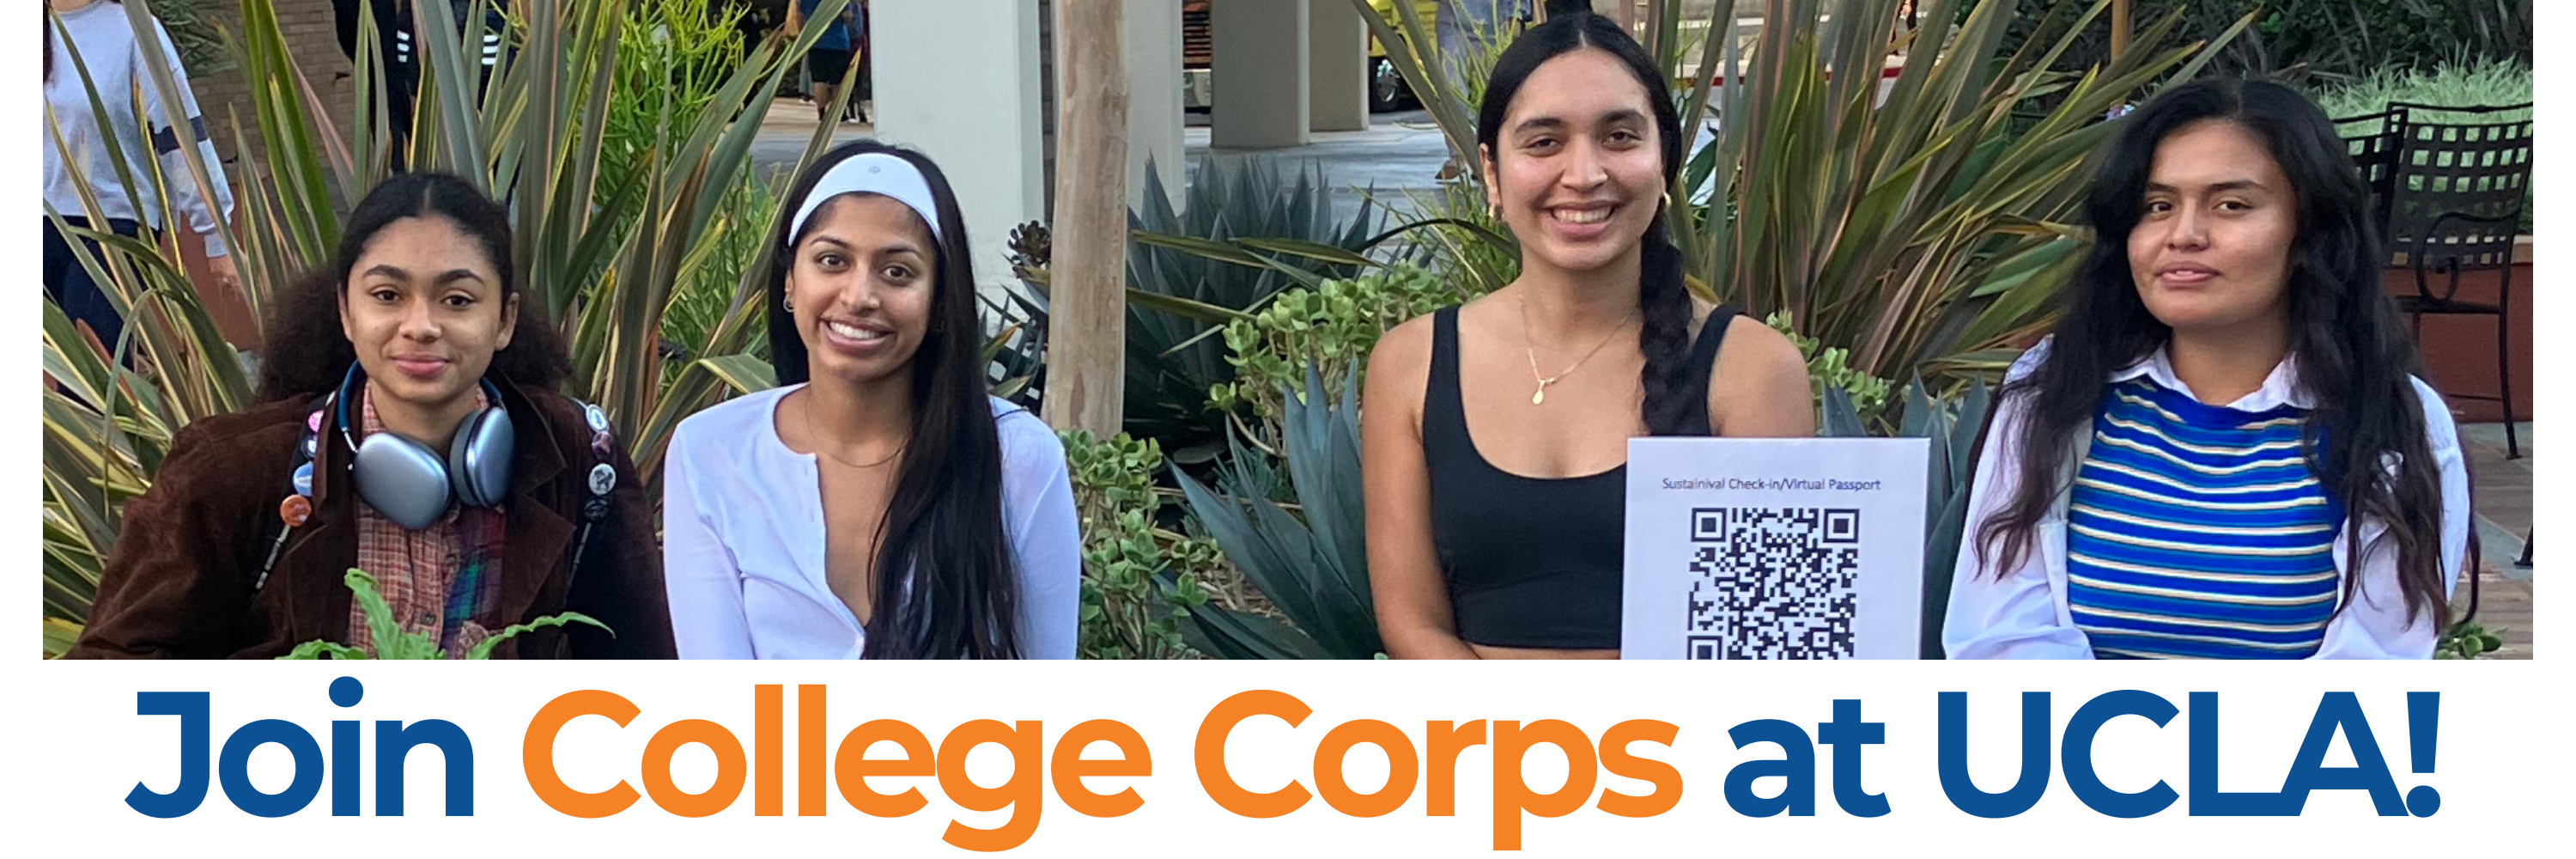 Four young women smile at the camera. Beneath the photo reads "Join College Corps at UCLA" in blue and orange letters